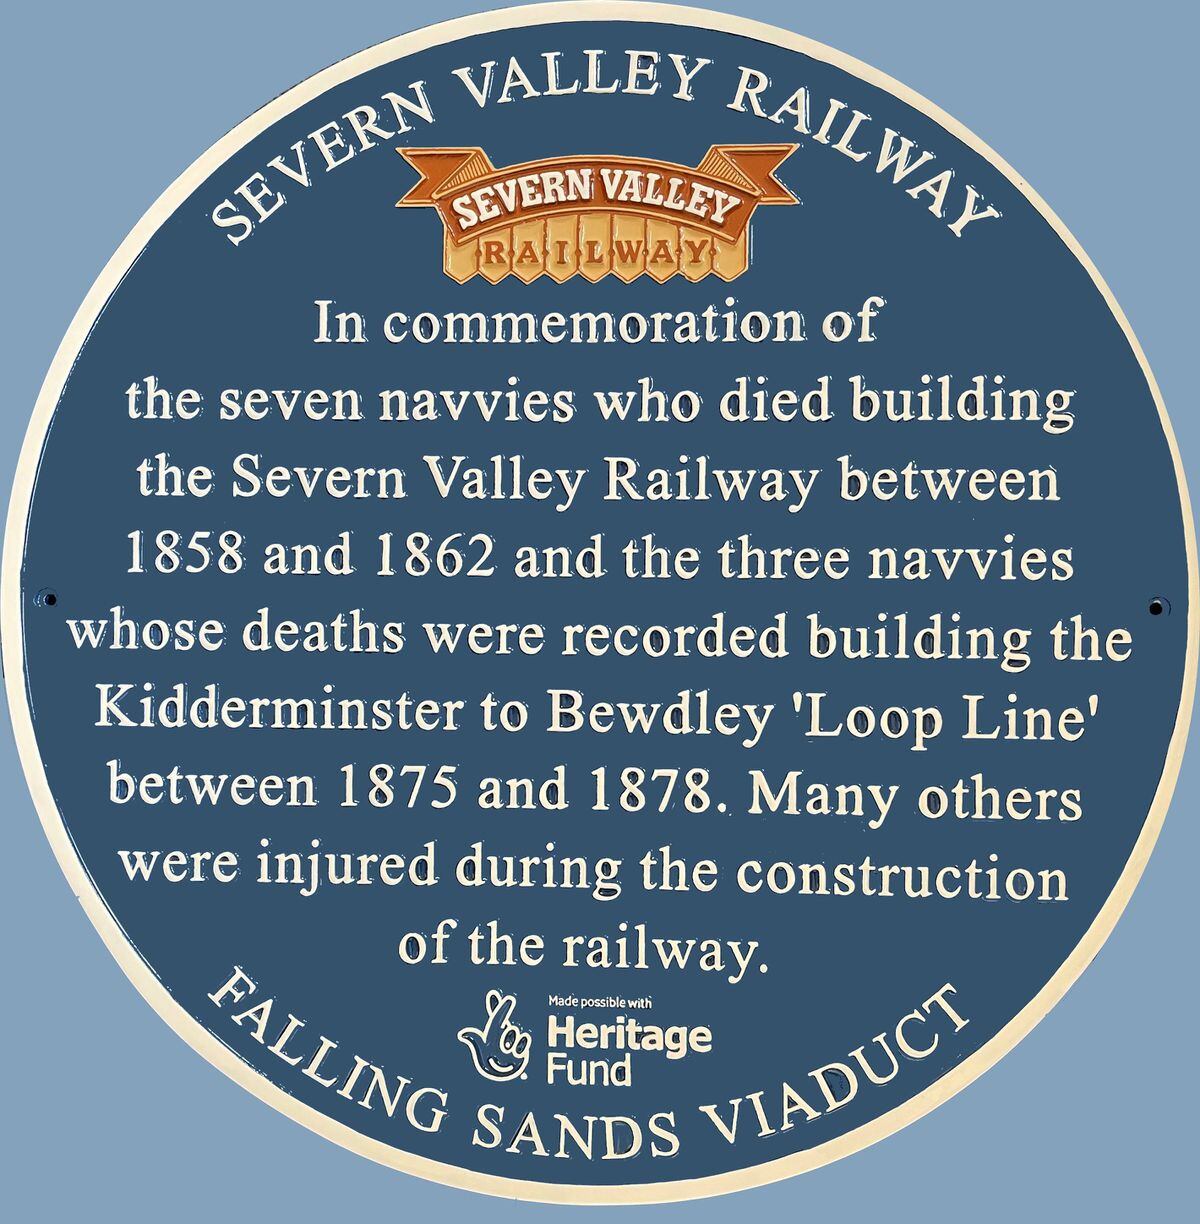 The navvies who died building the Severn Valley Railway have been honoured with a commemorative blue plaque